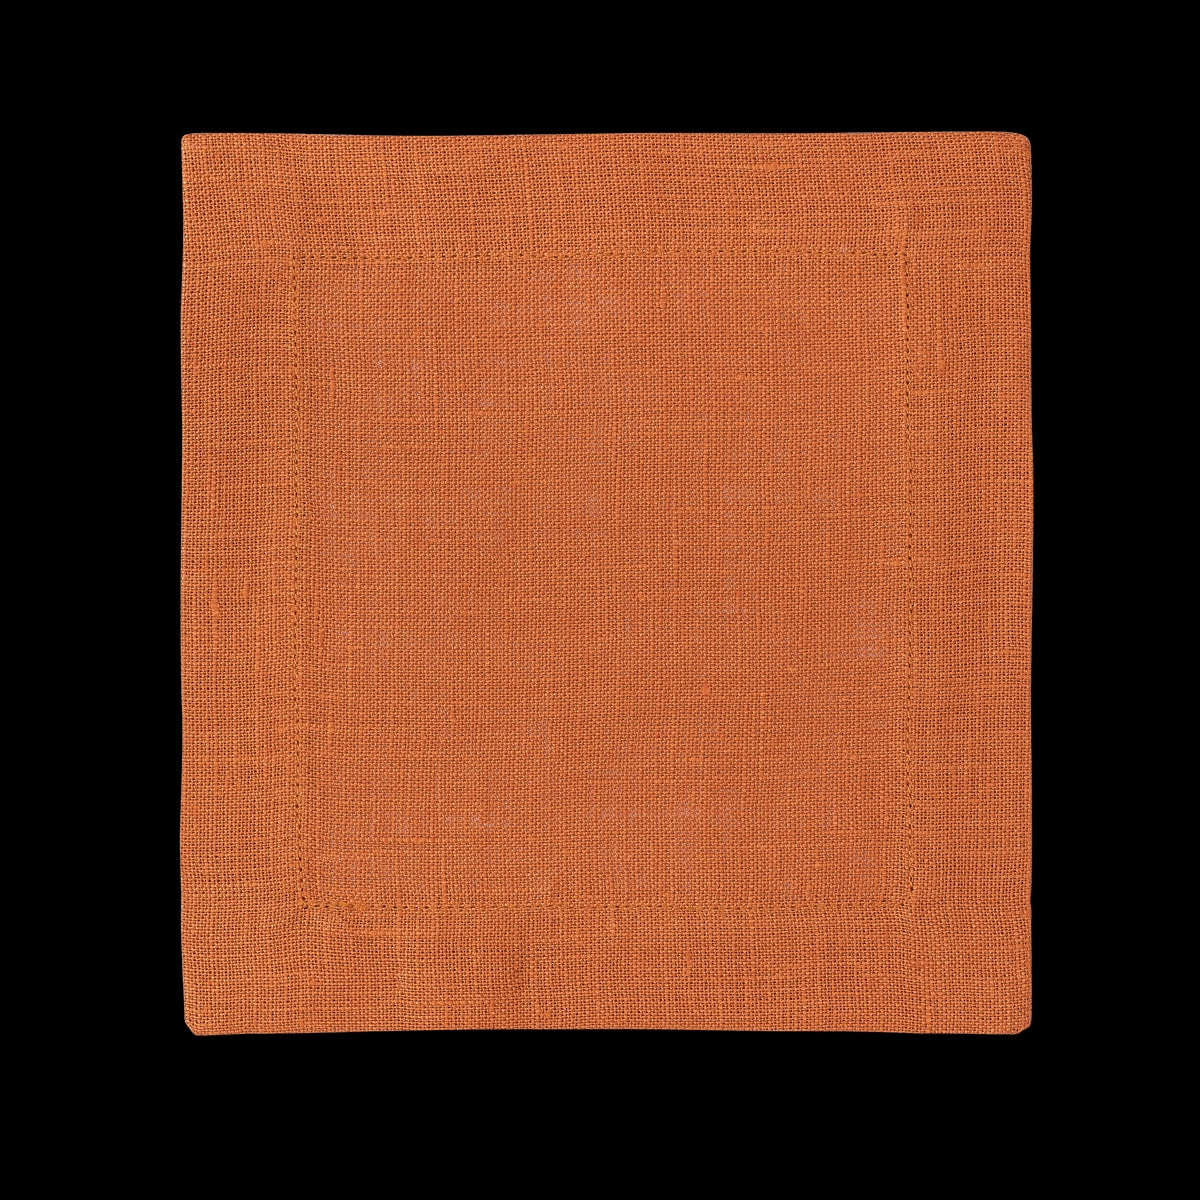 A square linen cocktail napkin in the color tangerine